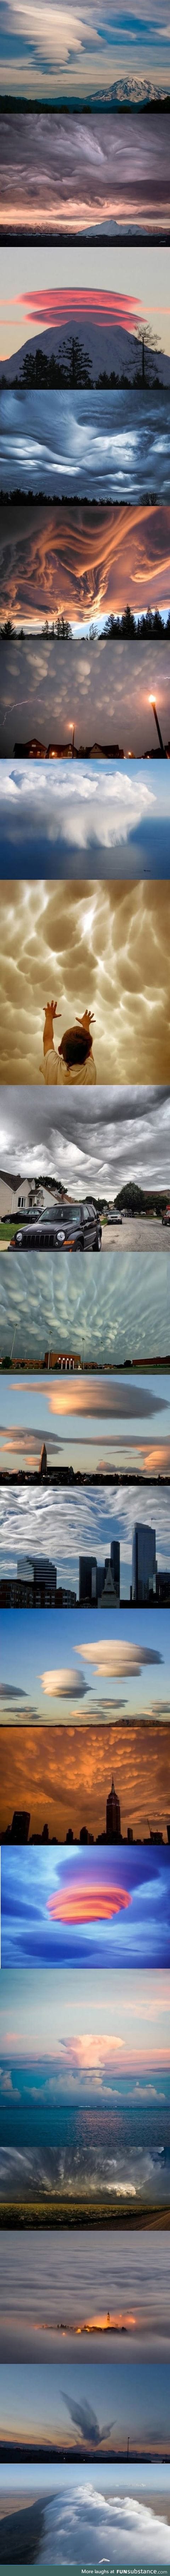 Some of the most spectacular cloud formations